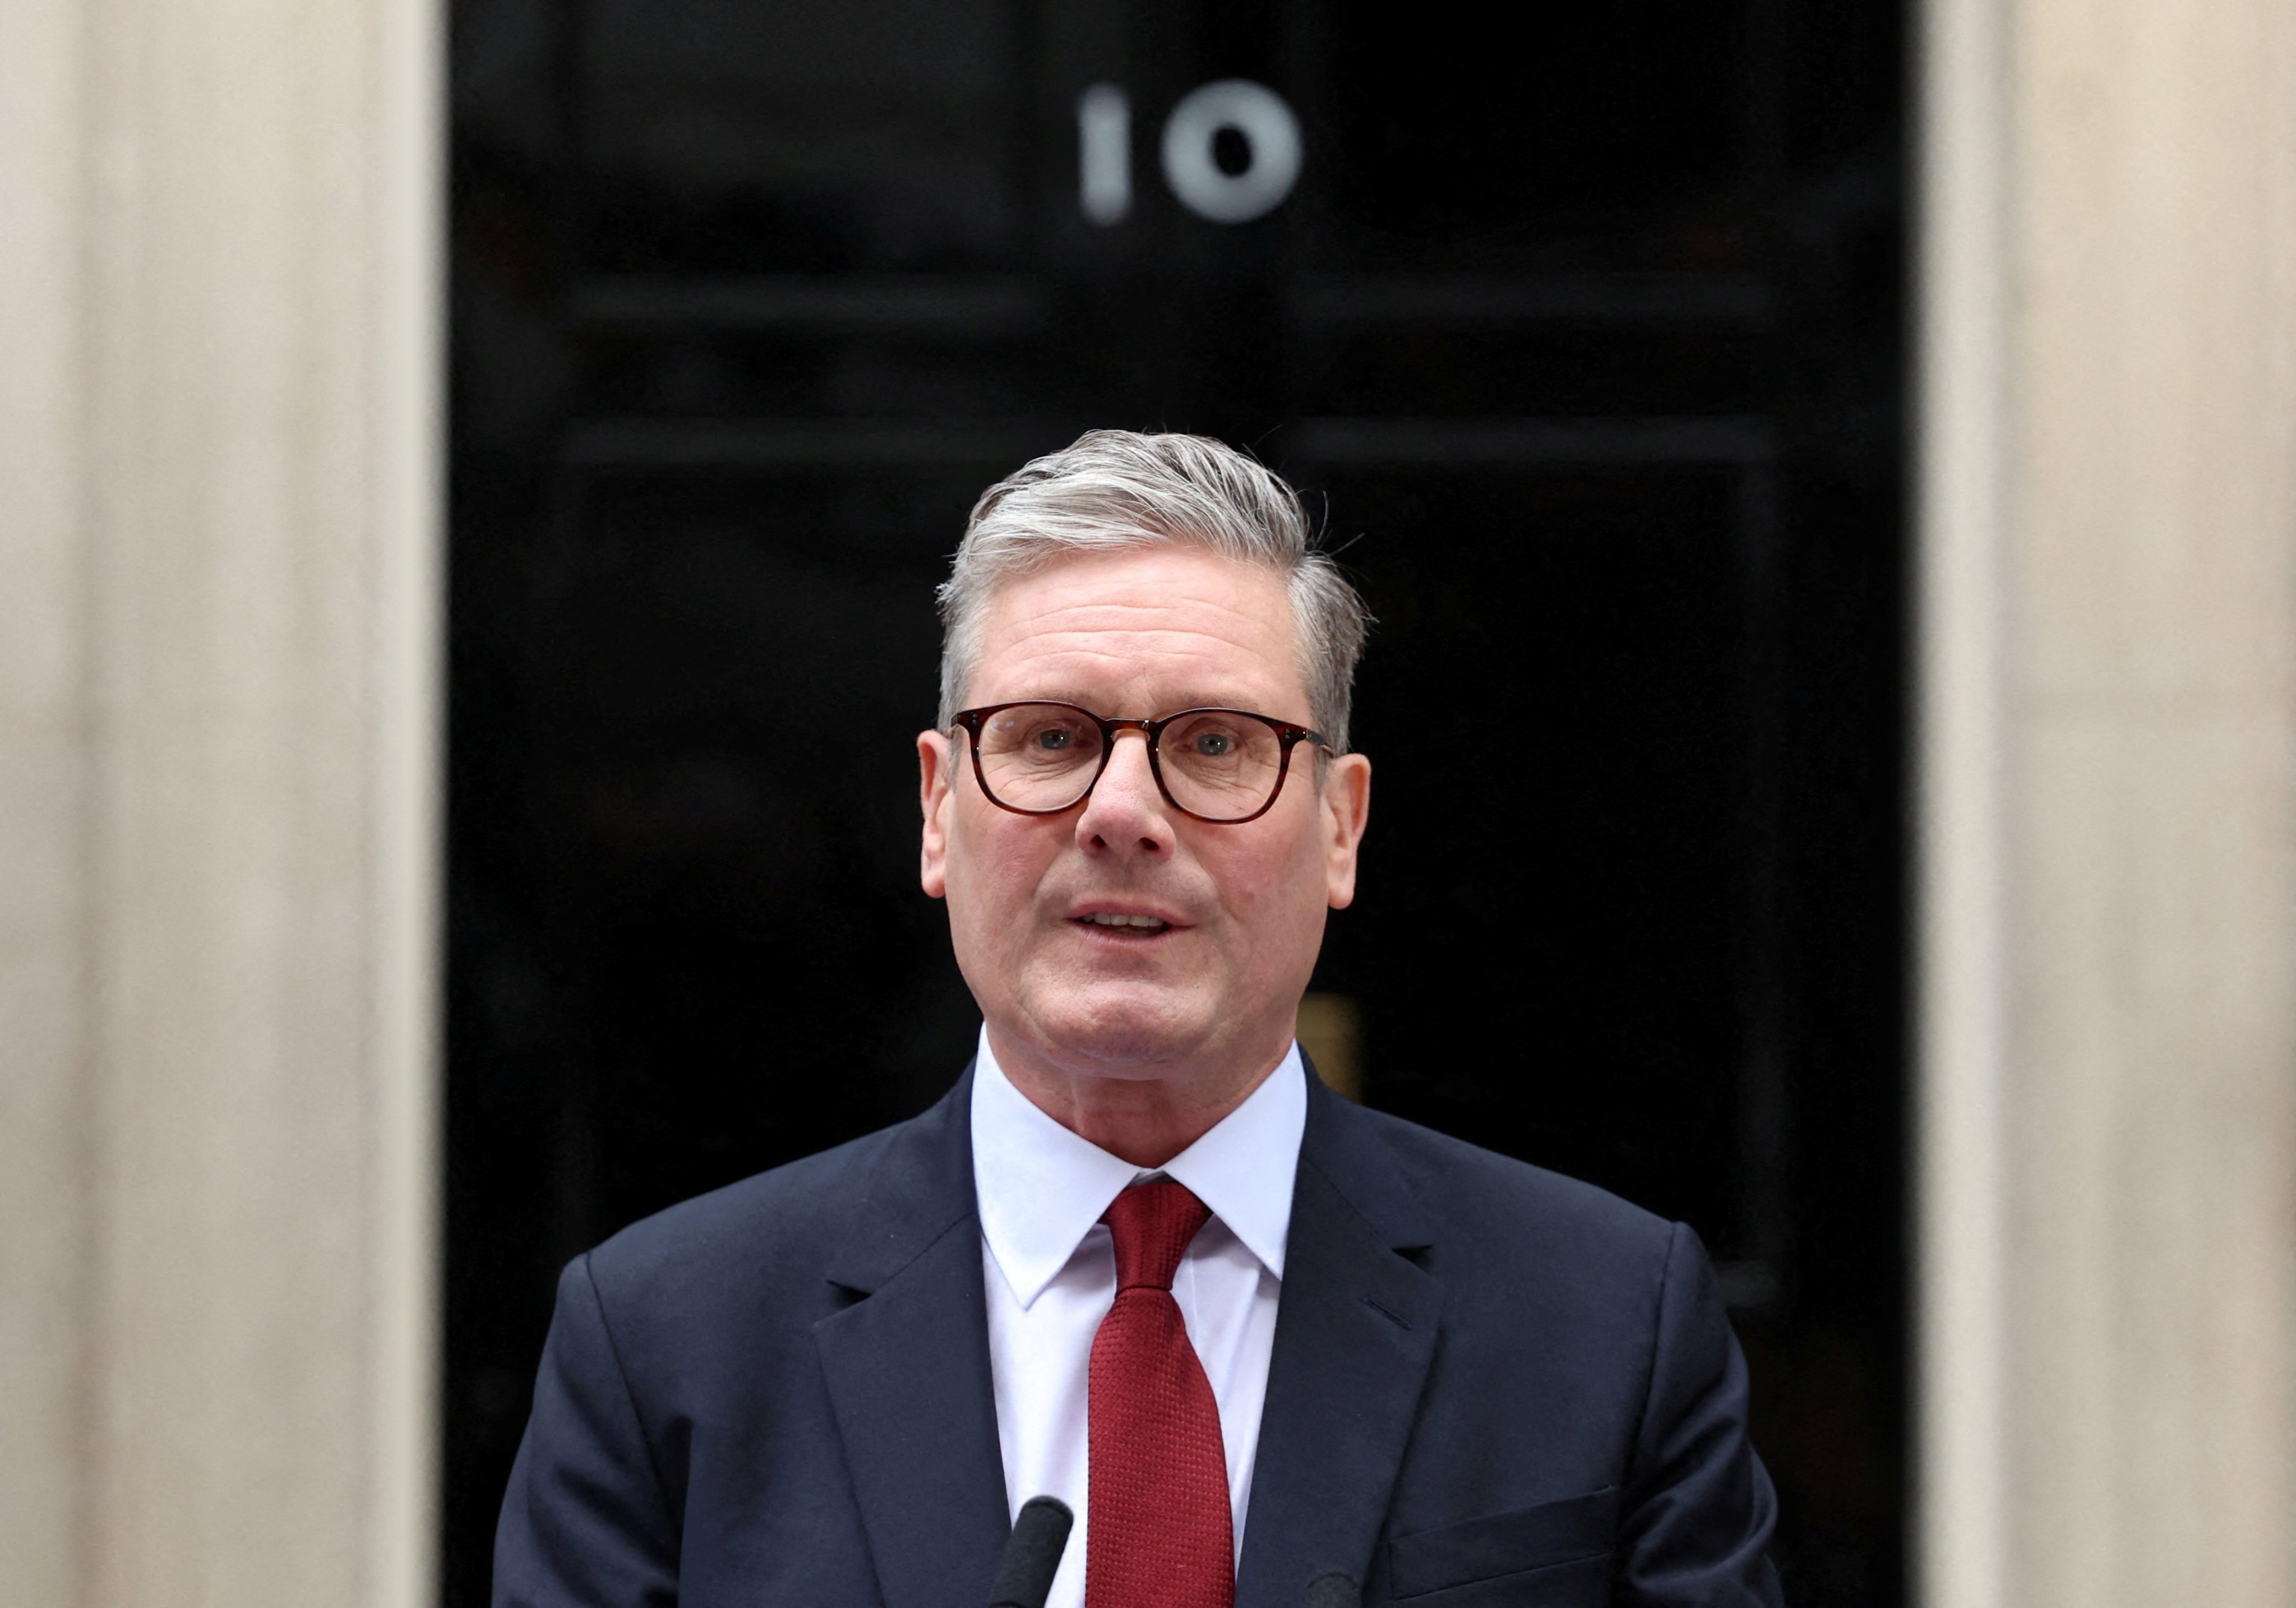 British Prime Minister Keir Starmer delivers a speech at 10 Downing Street. Photo: Reuters